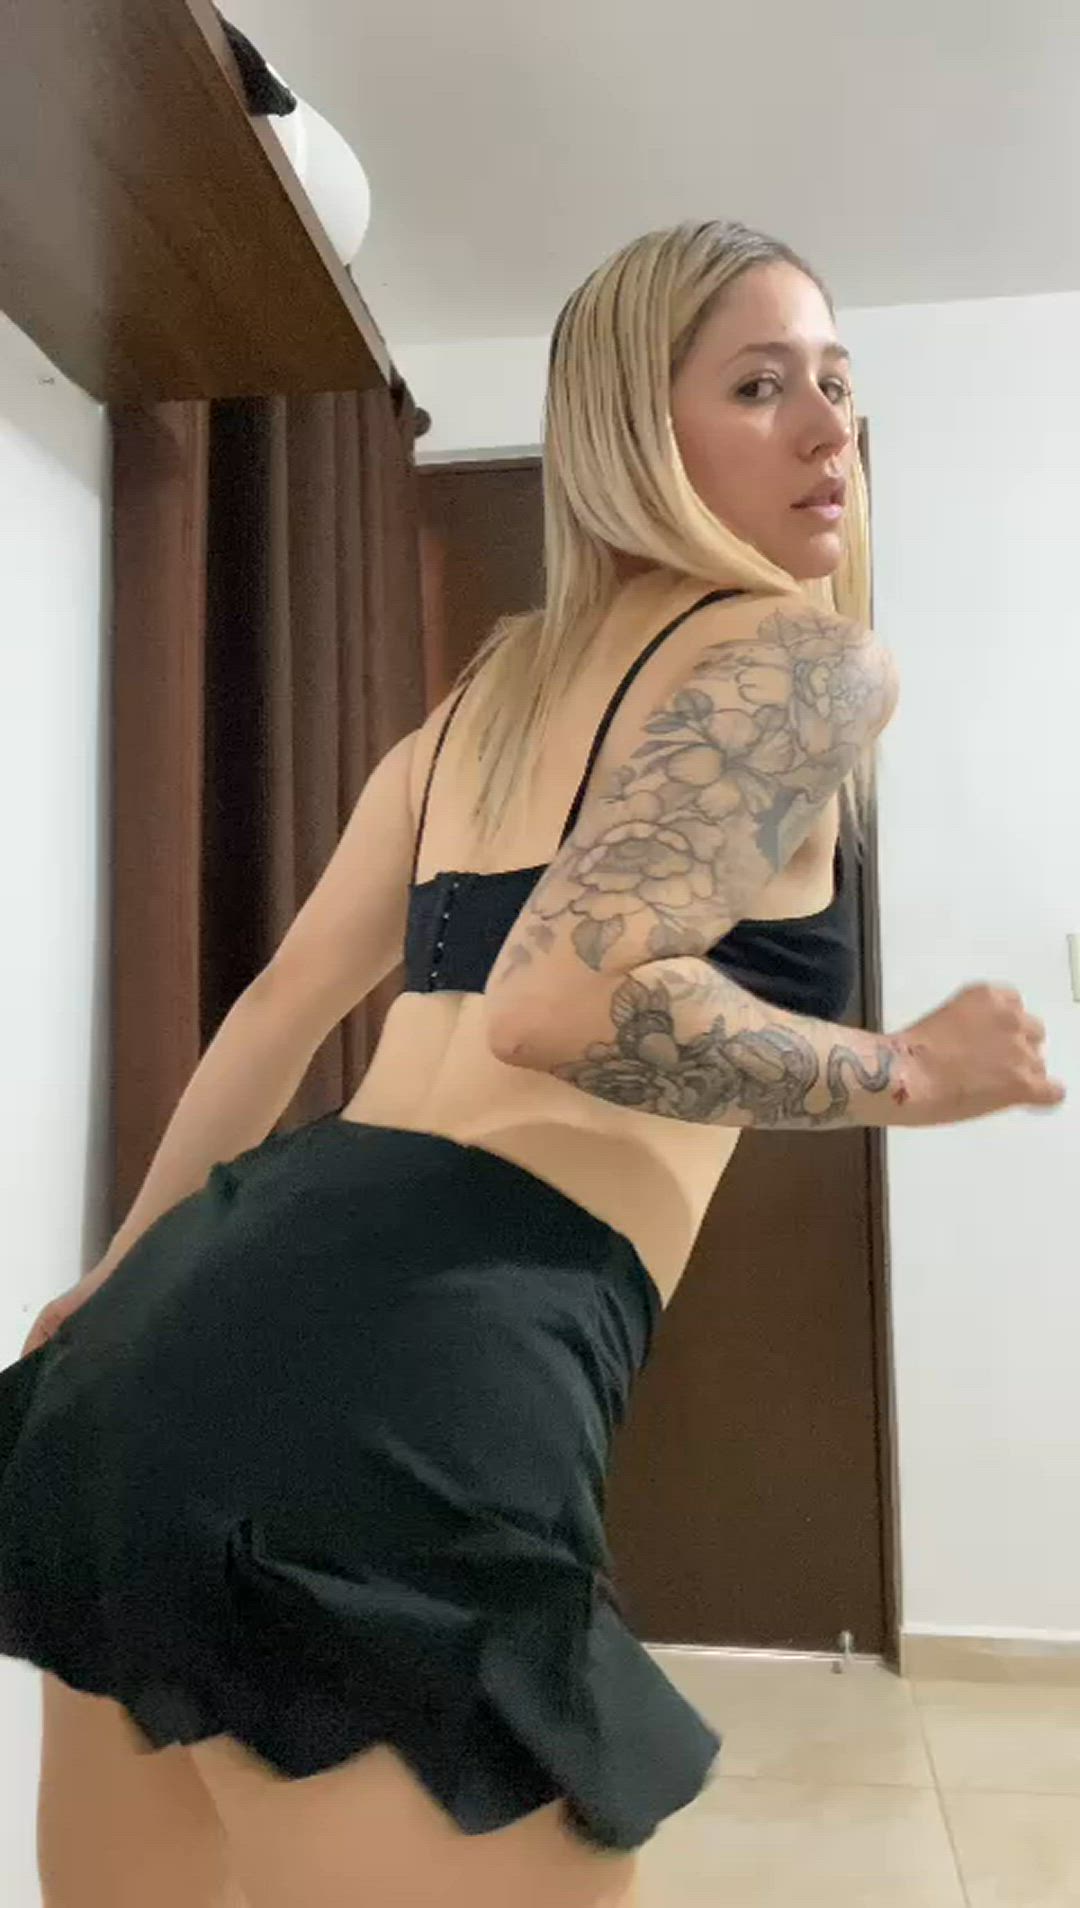 Ass porn video with onlyfans model Camil0530 <strong>@camil0530</strong>